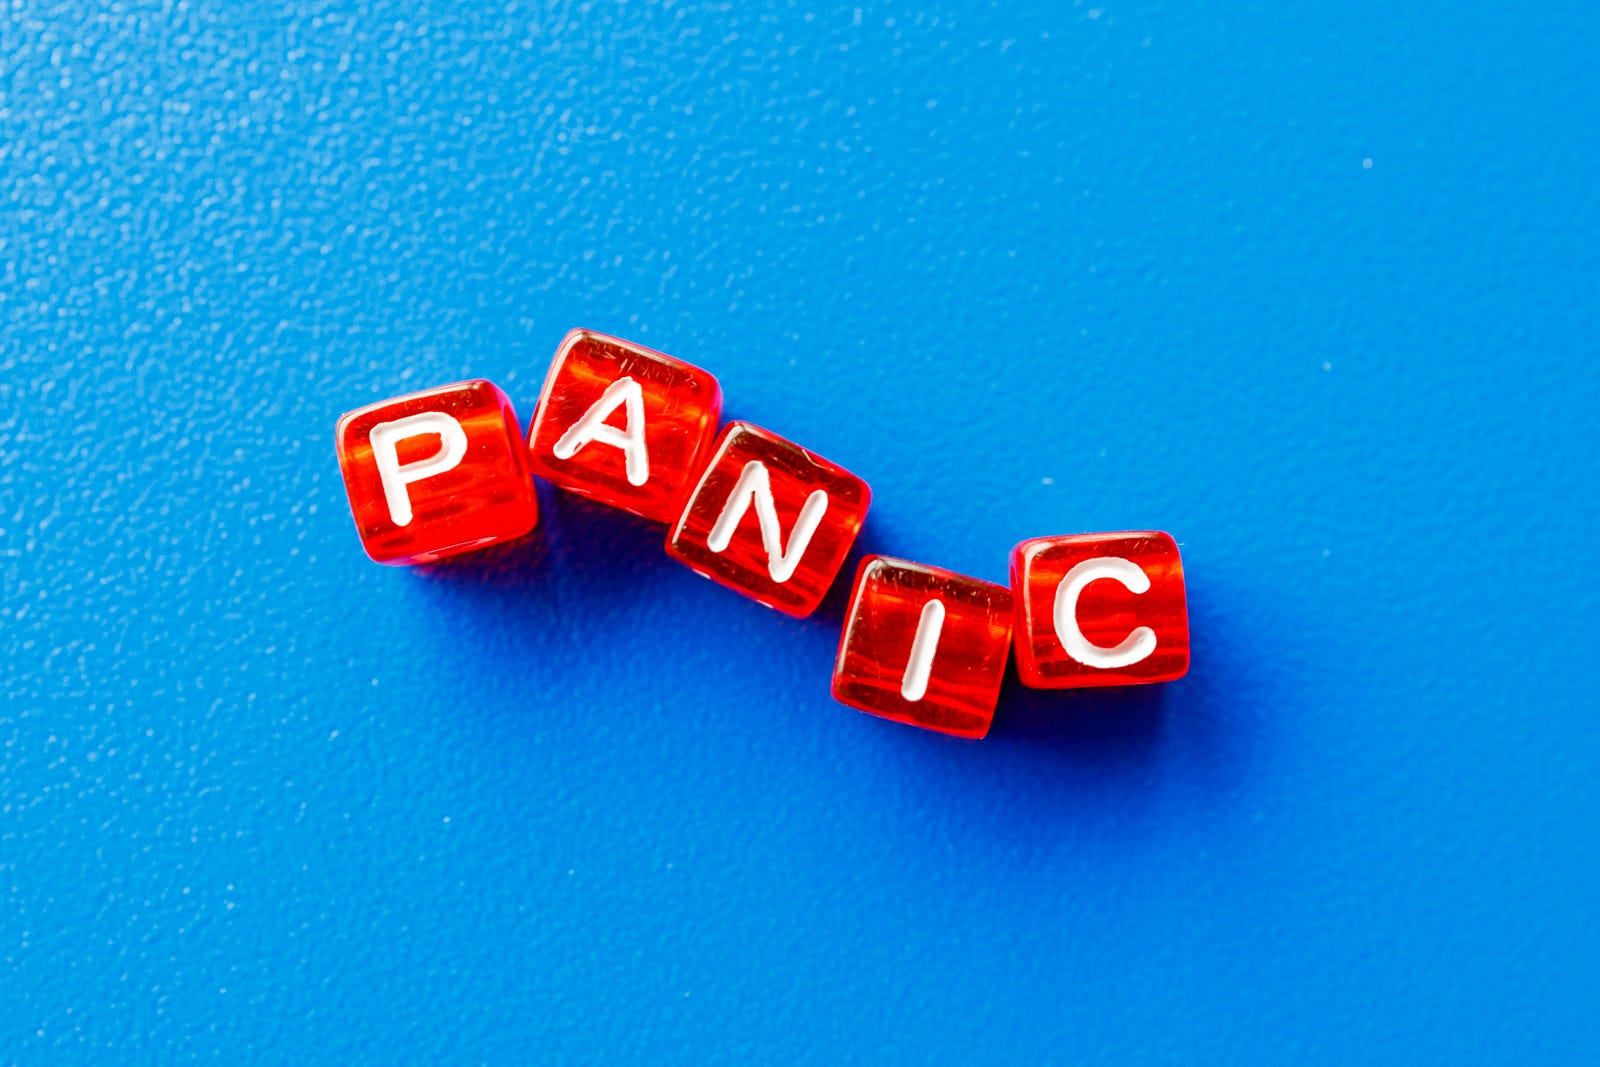 The word PANIC spelled out in white letters on red dice. There is a blue background.